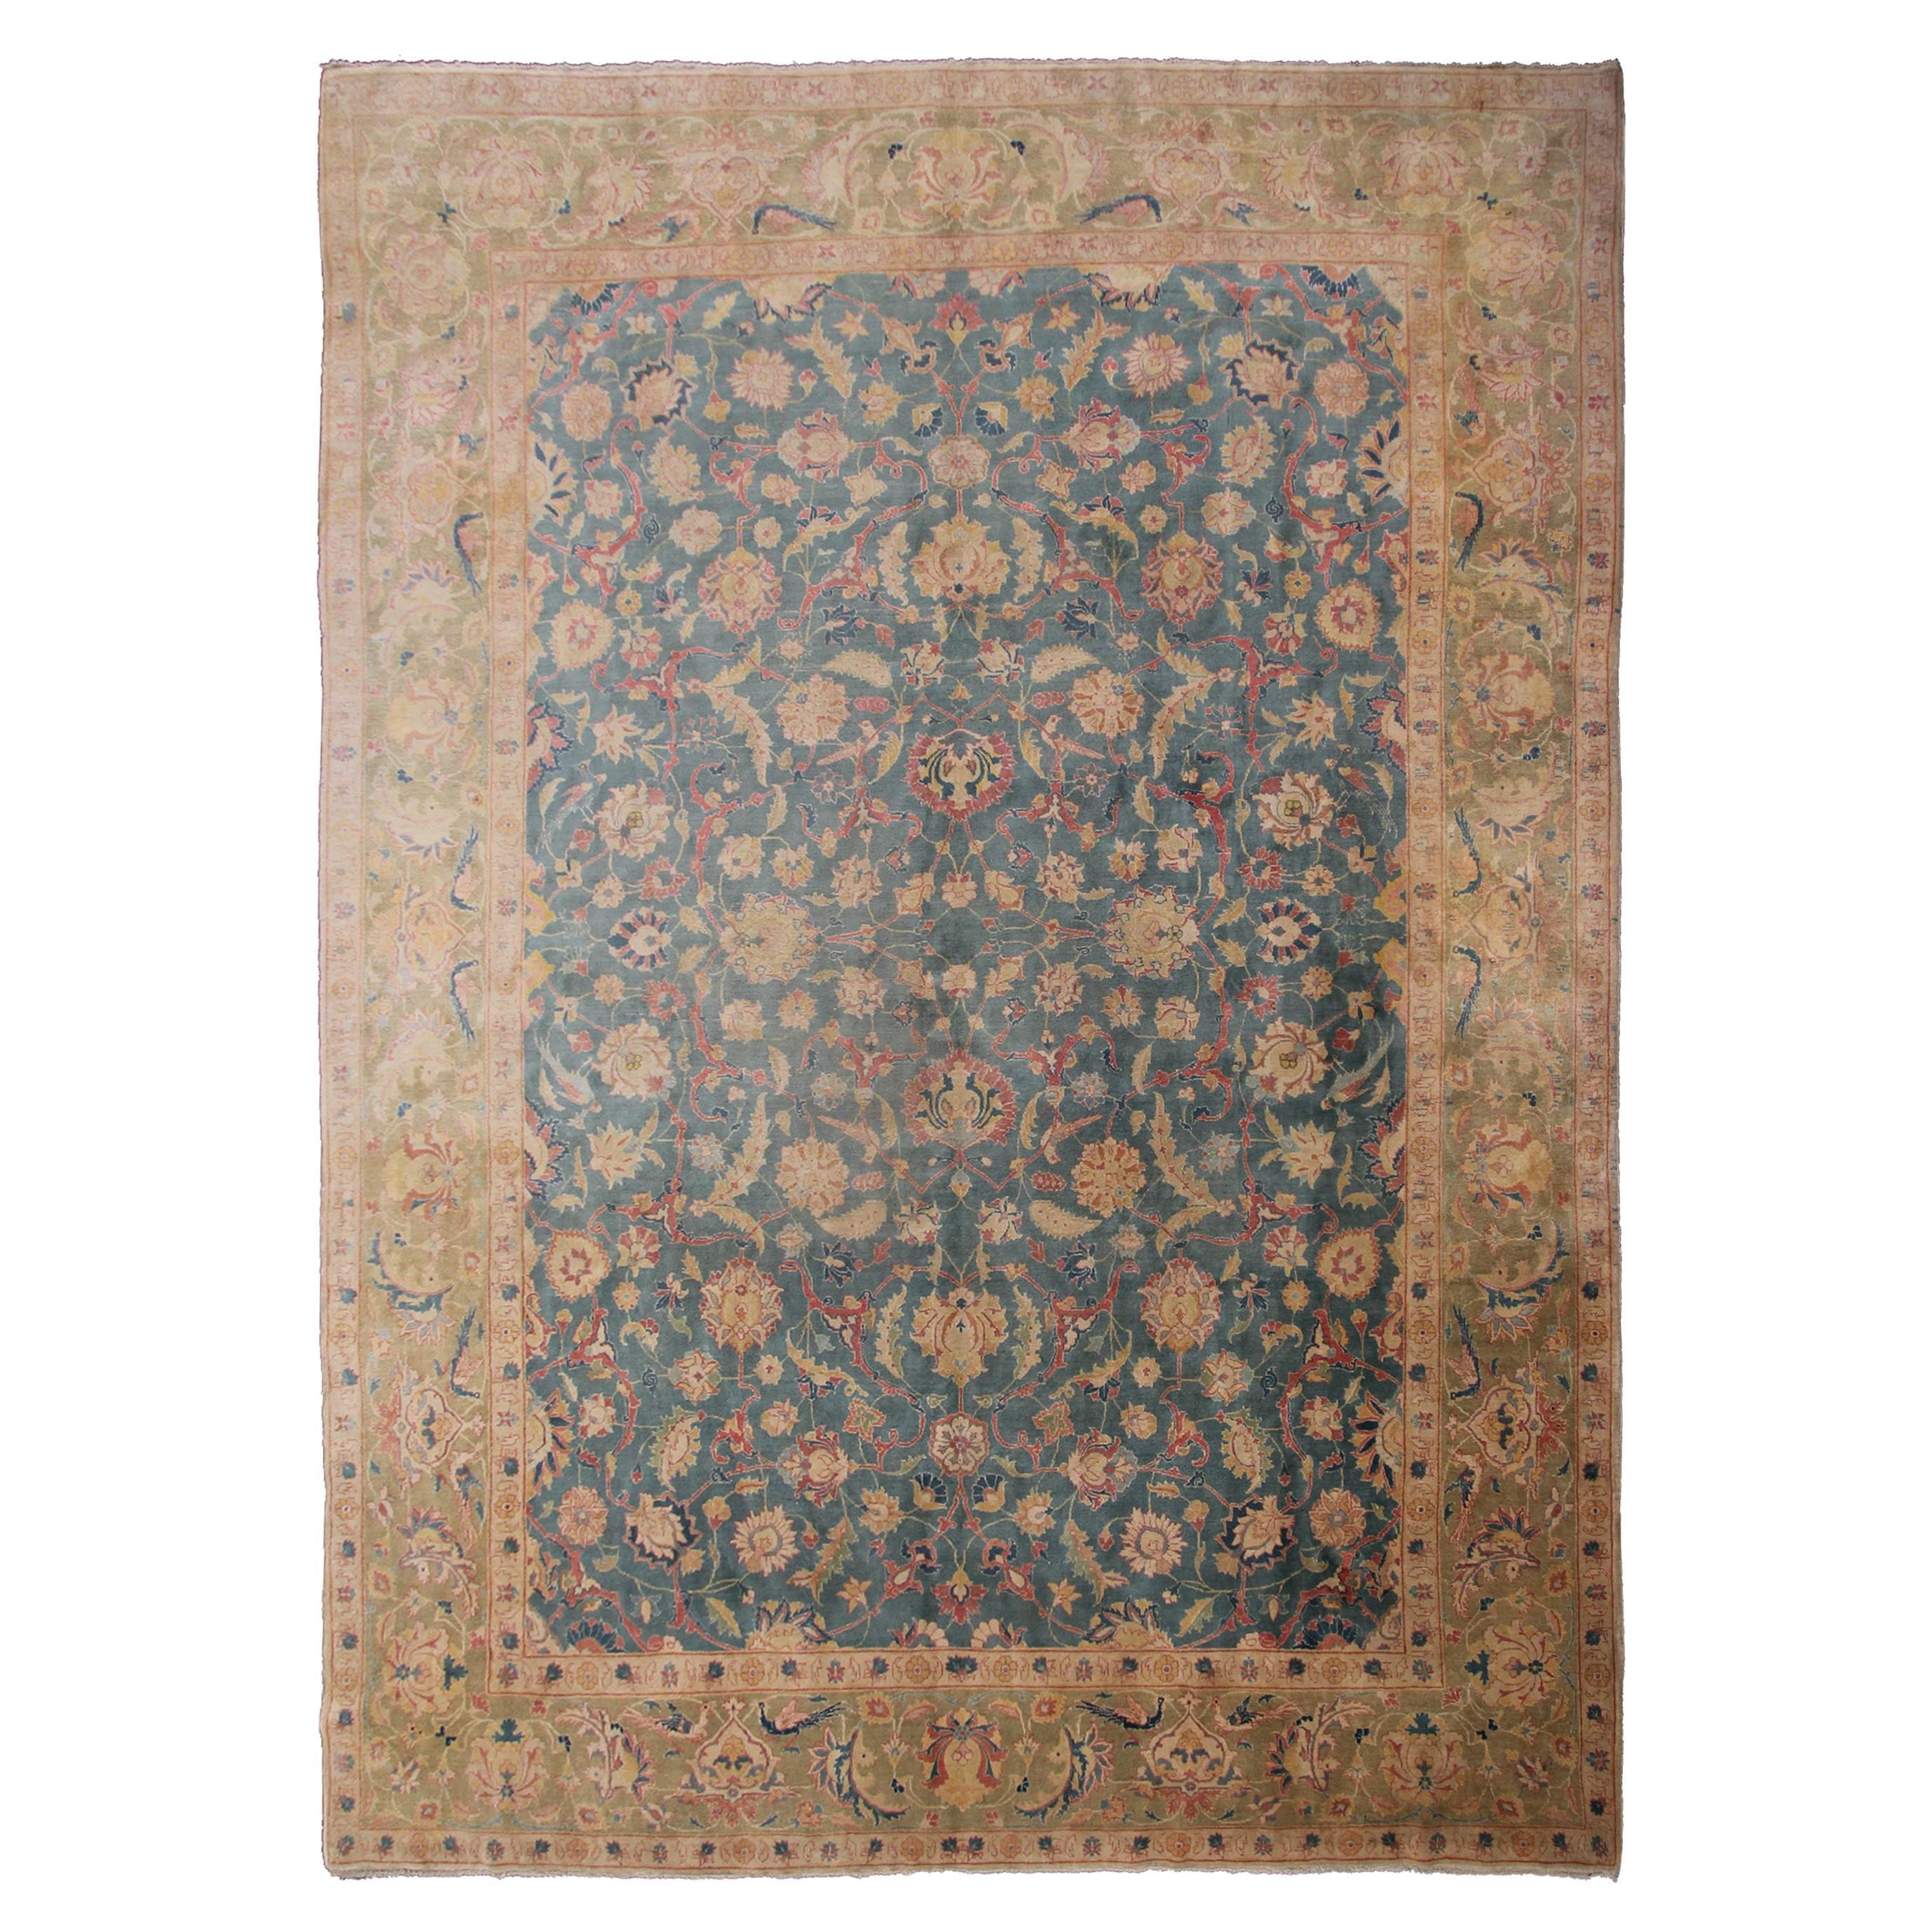 Antique Persian Rug Antique Persian Tabriz Rug Geometric Overall Allover For Sale